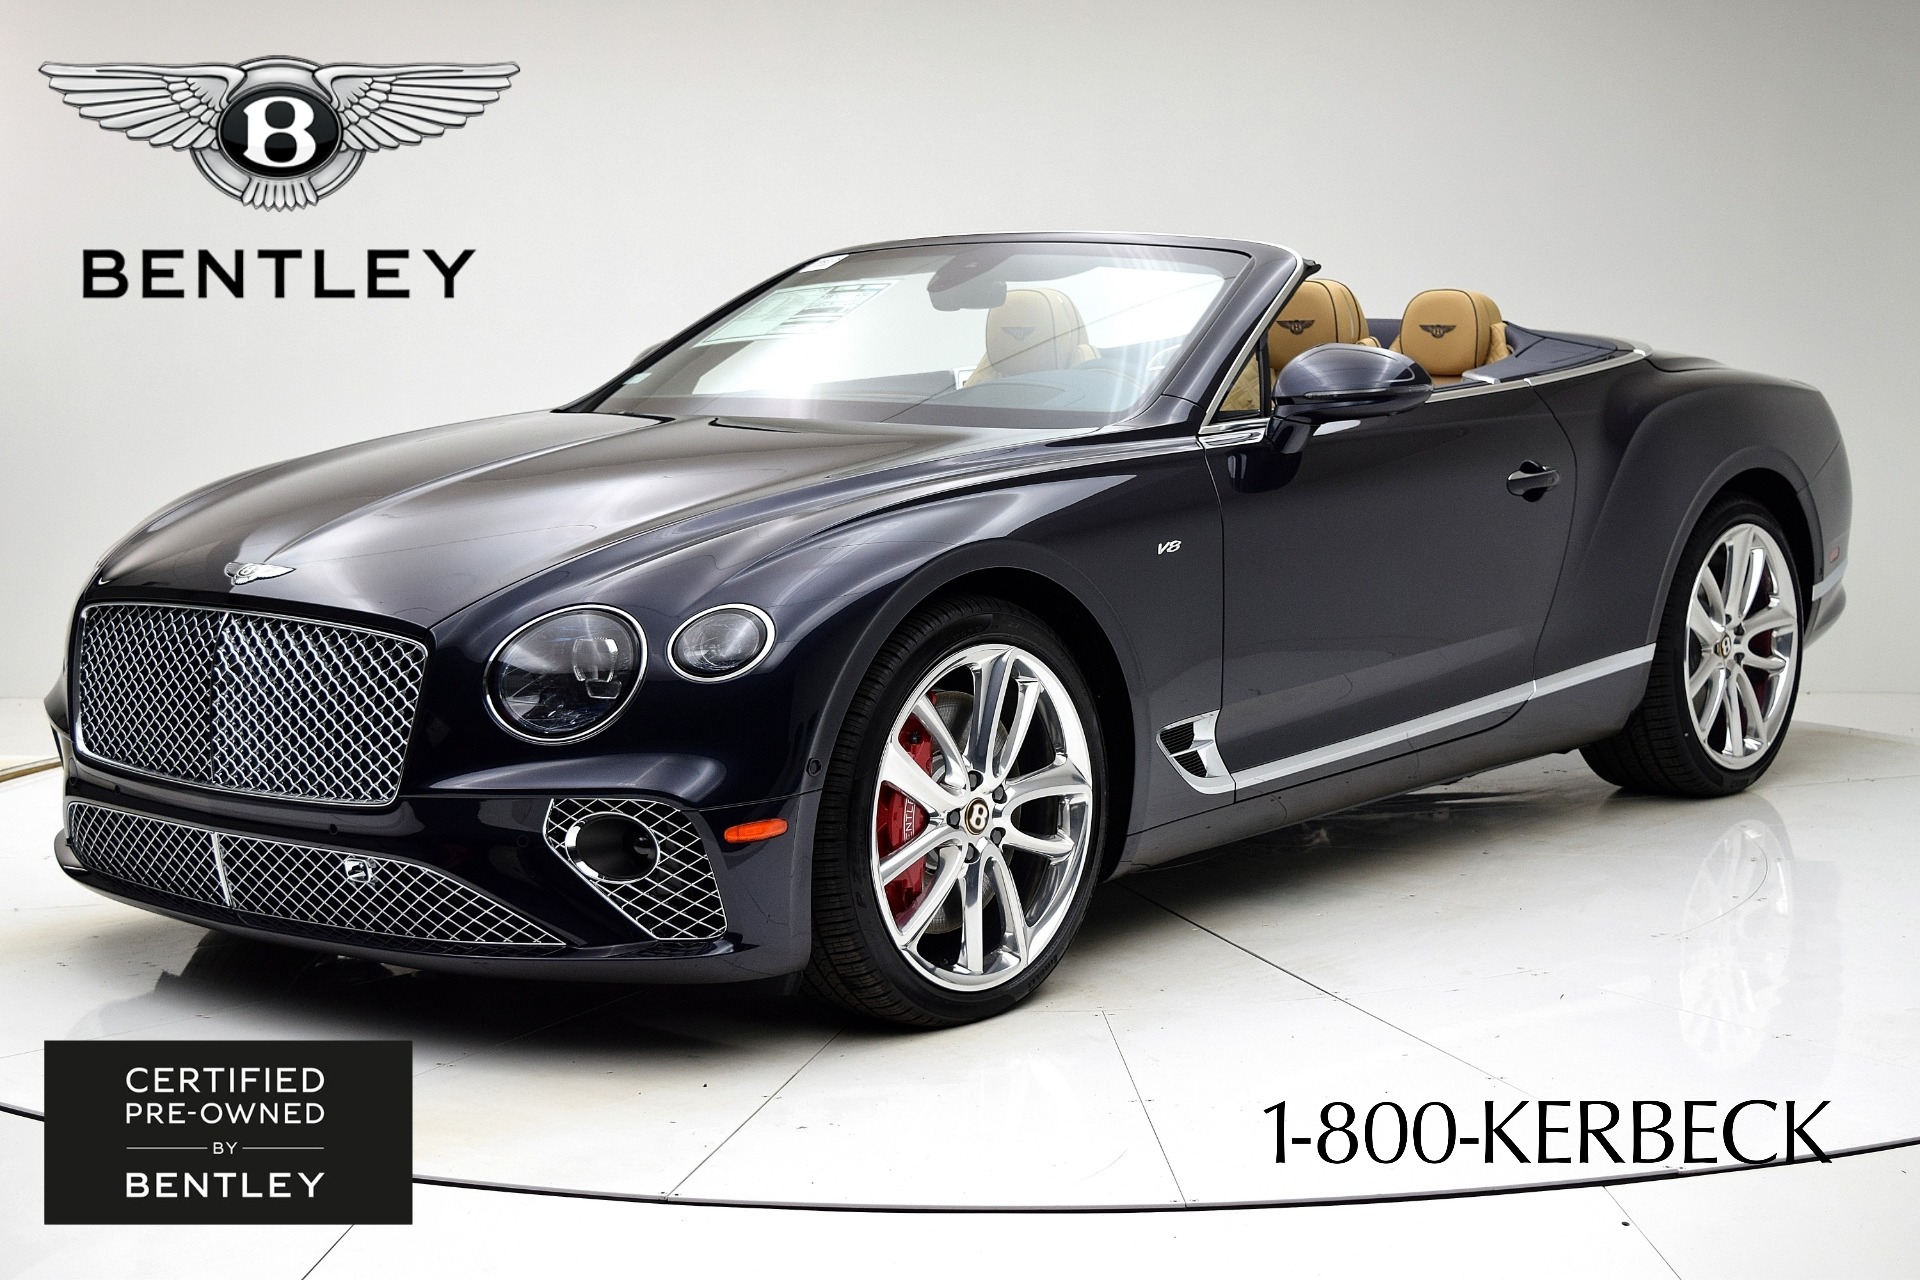 Used 2020 Bentley Continental GT Convertible / LEASE OPTION AVAILABLE for sale Sold at F.C. Kerbeck Aston Martin in Palmyra NJ 08065 2